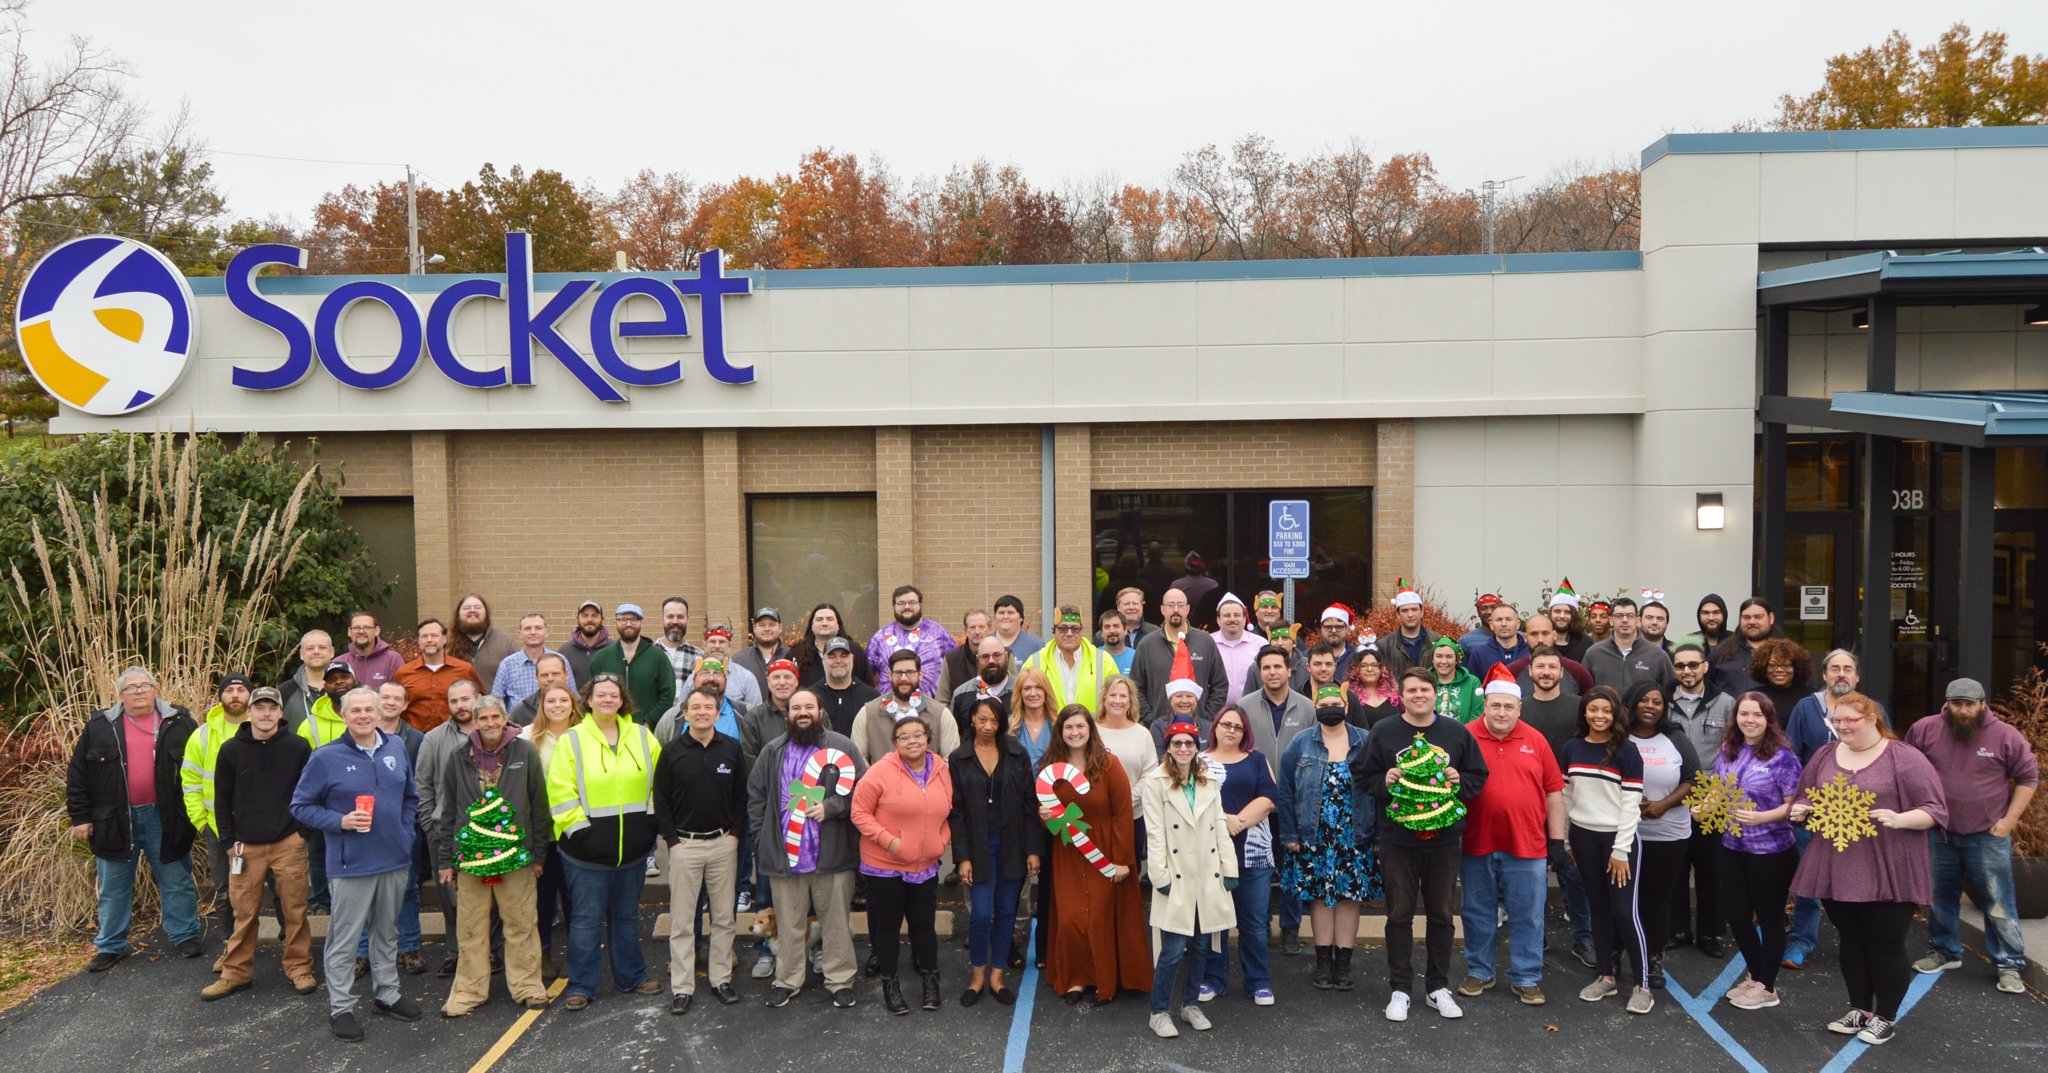 Socket Telecom employees in Columbia, MO for Christmas photo